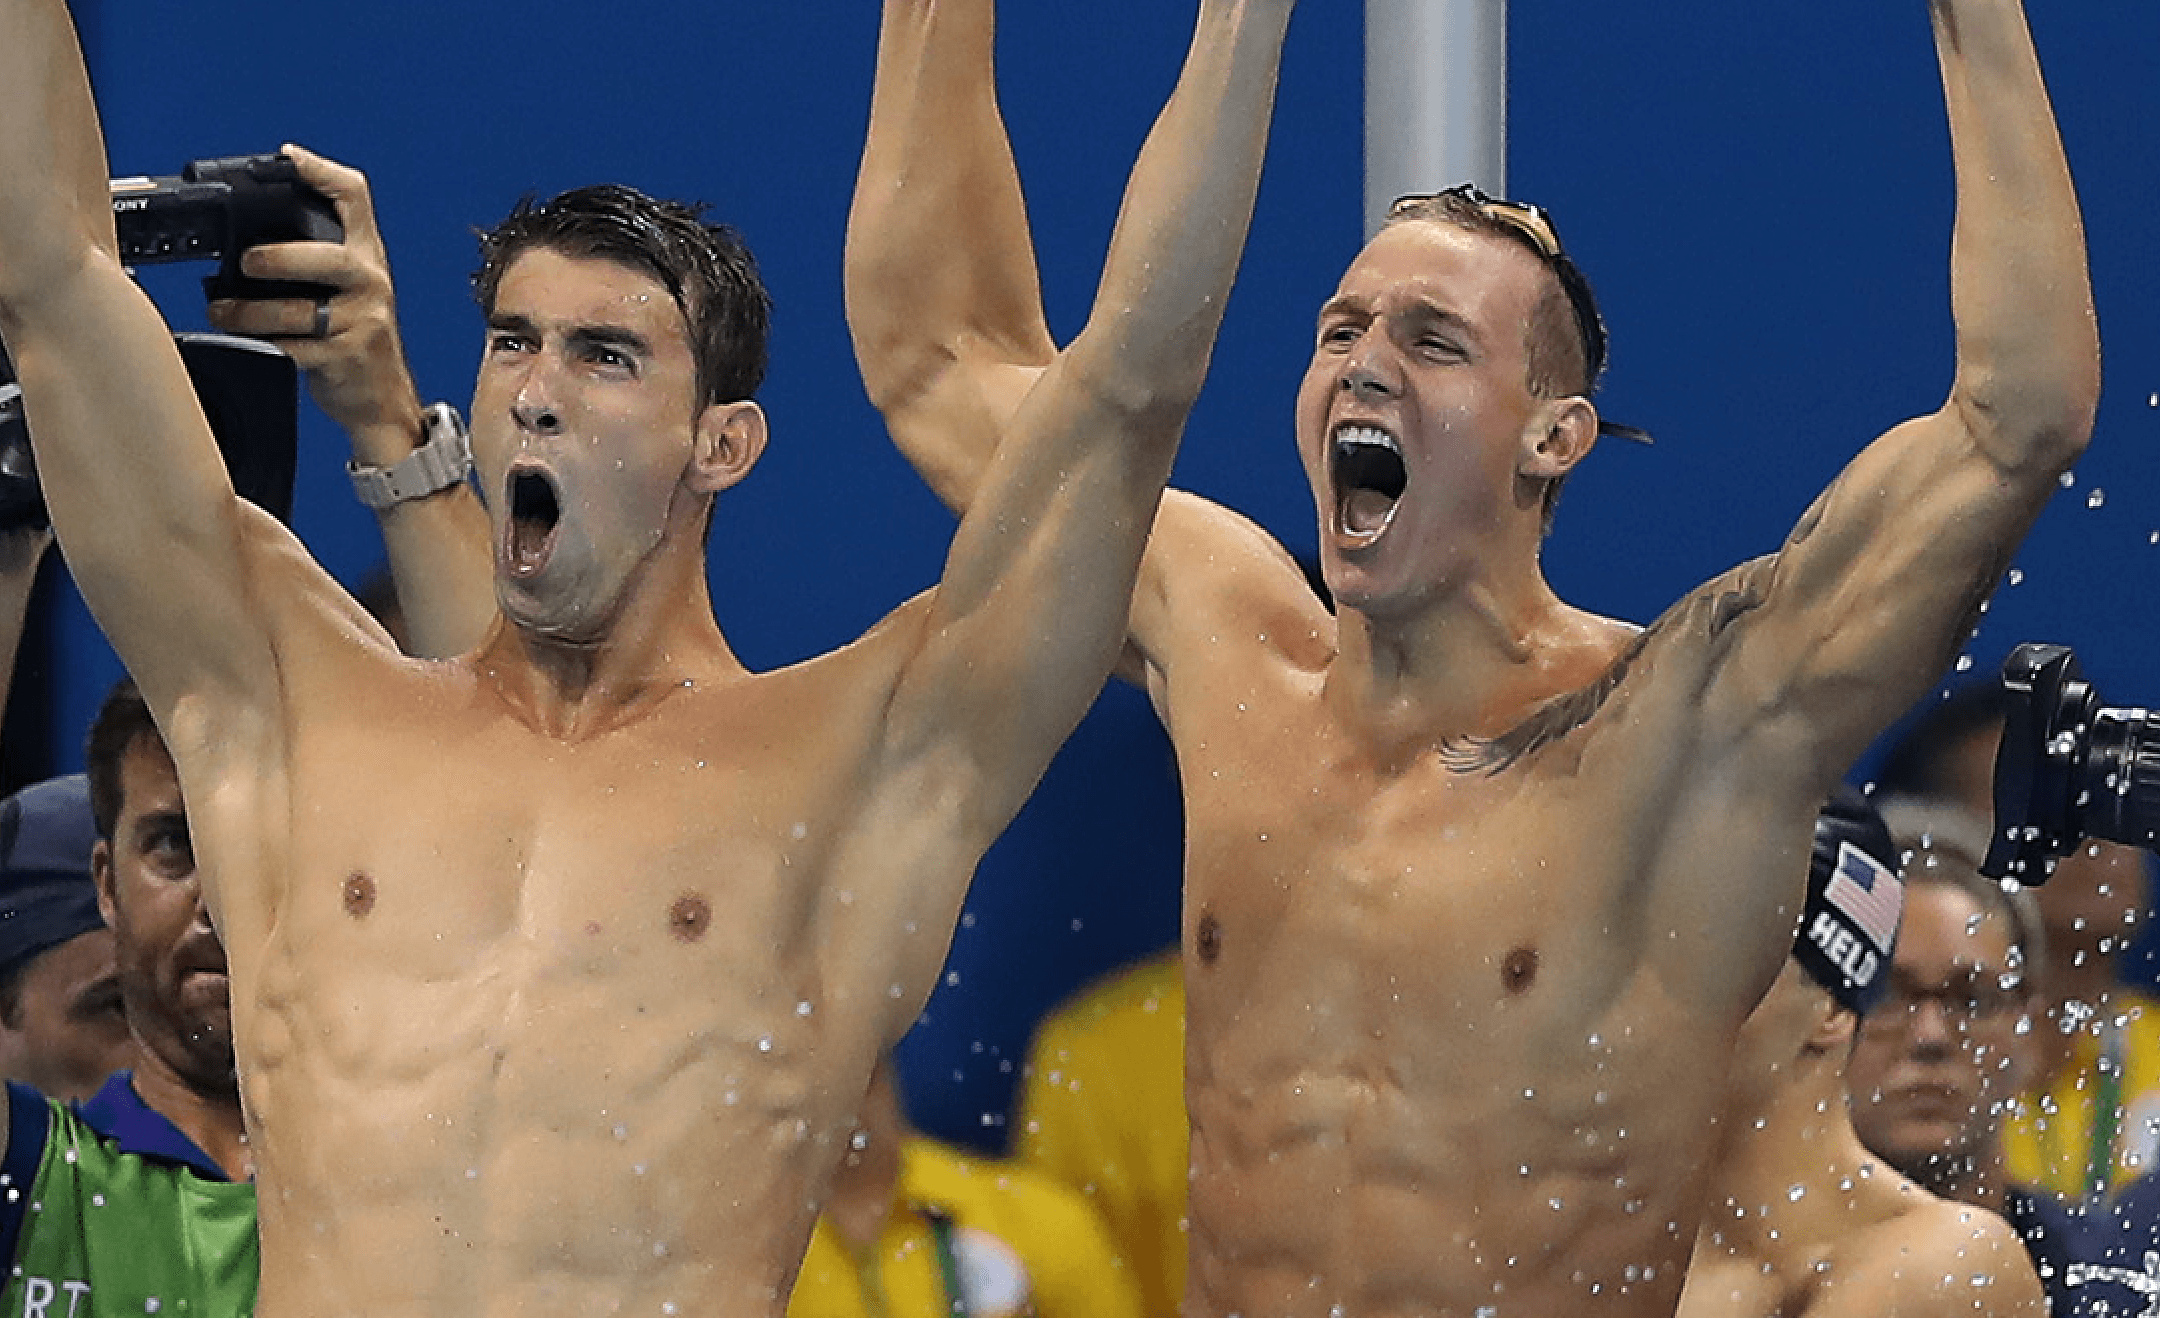 21 Things You Can Learn from the Best Swimmers on the